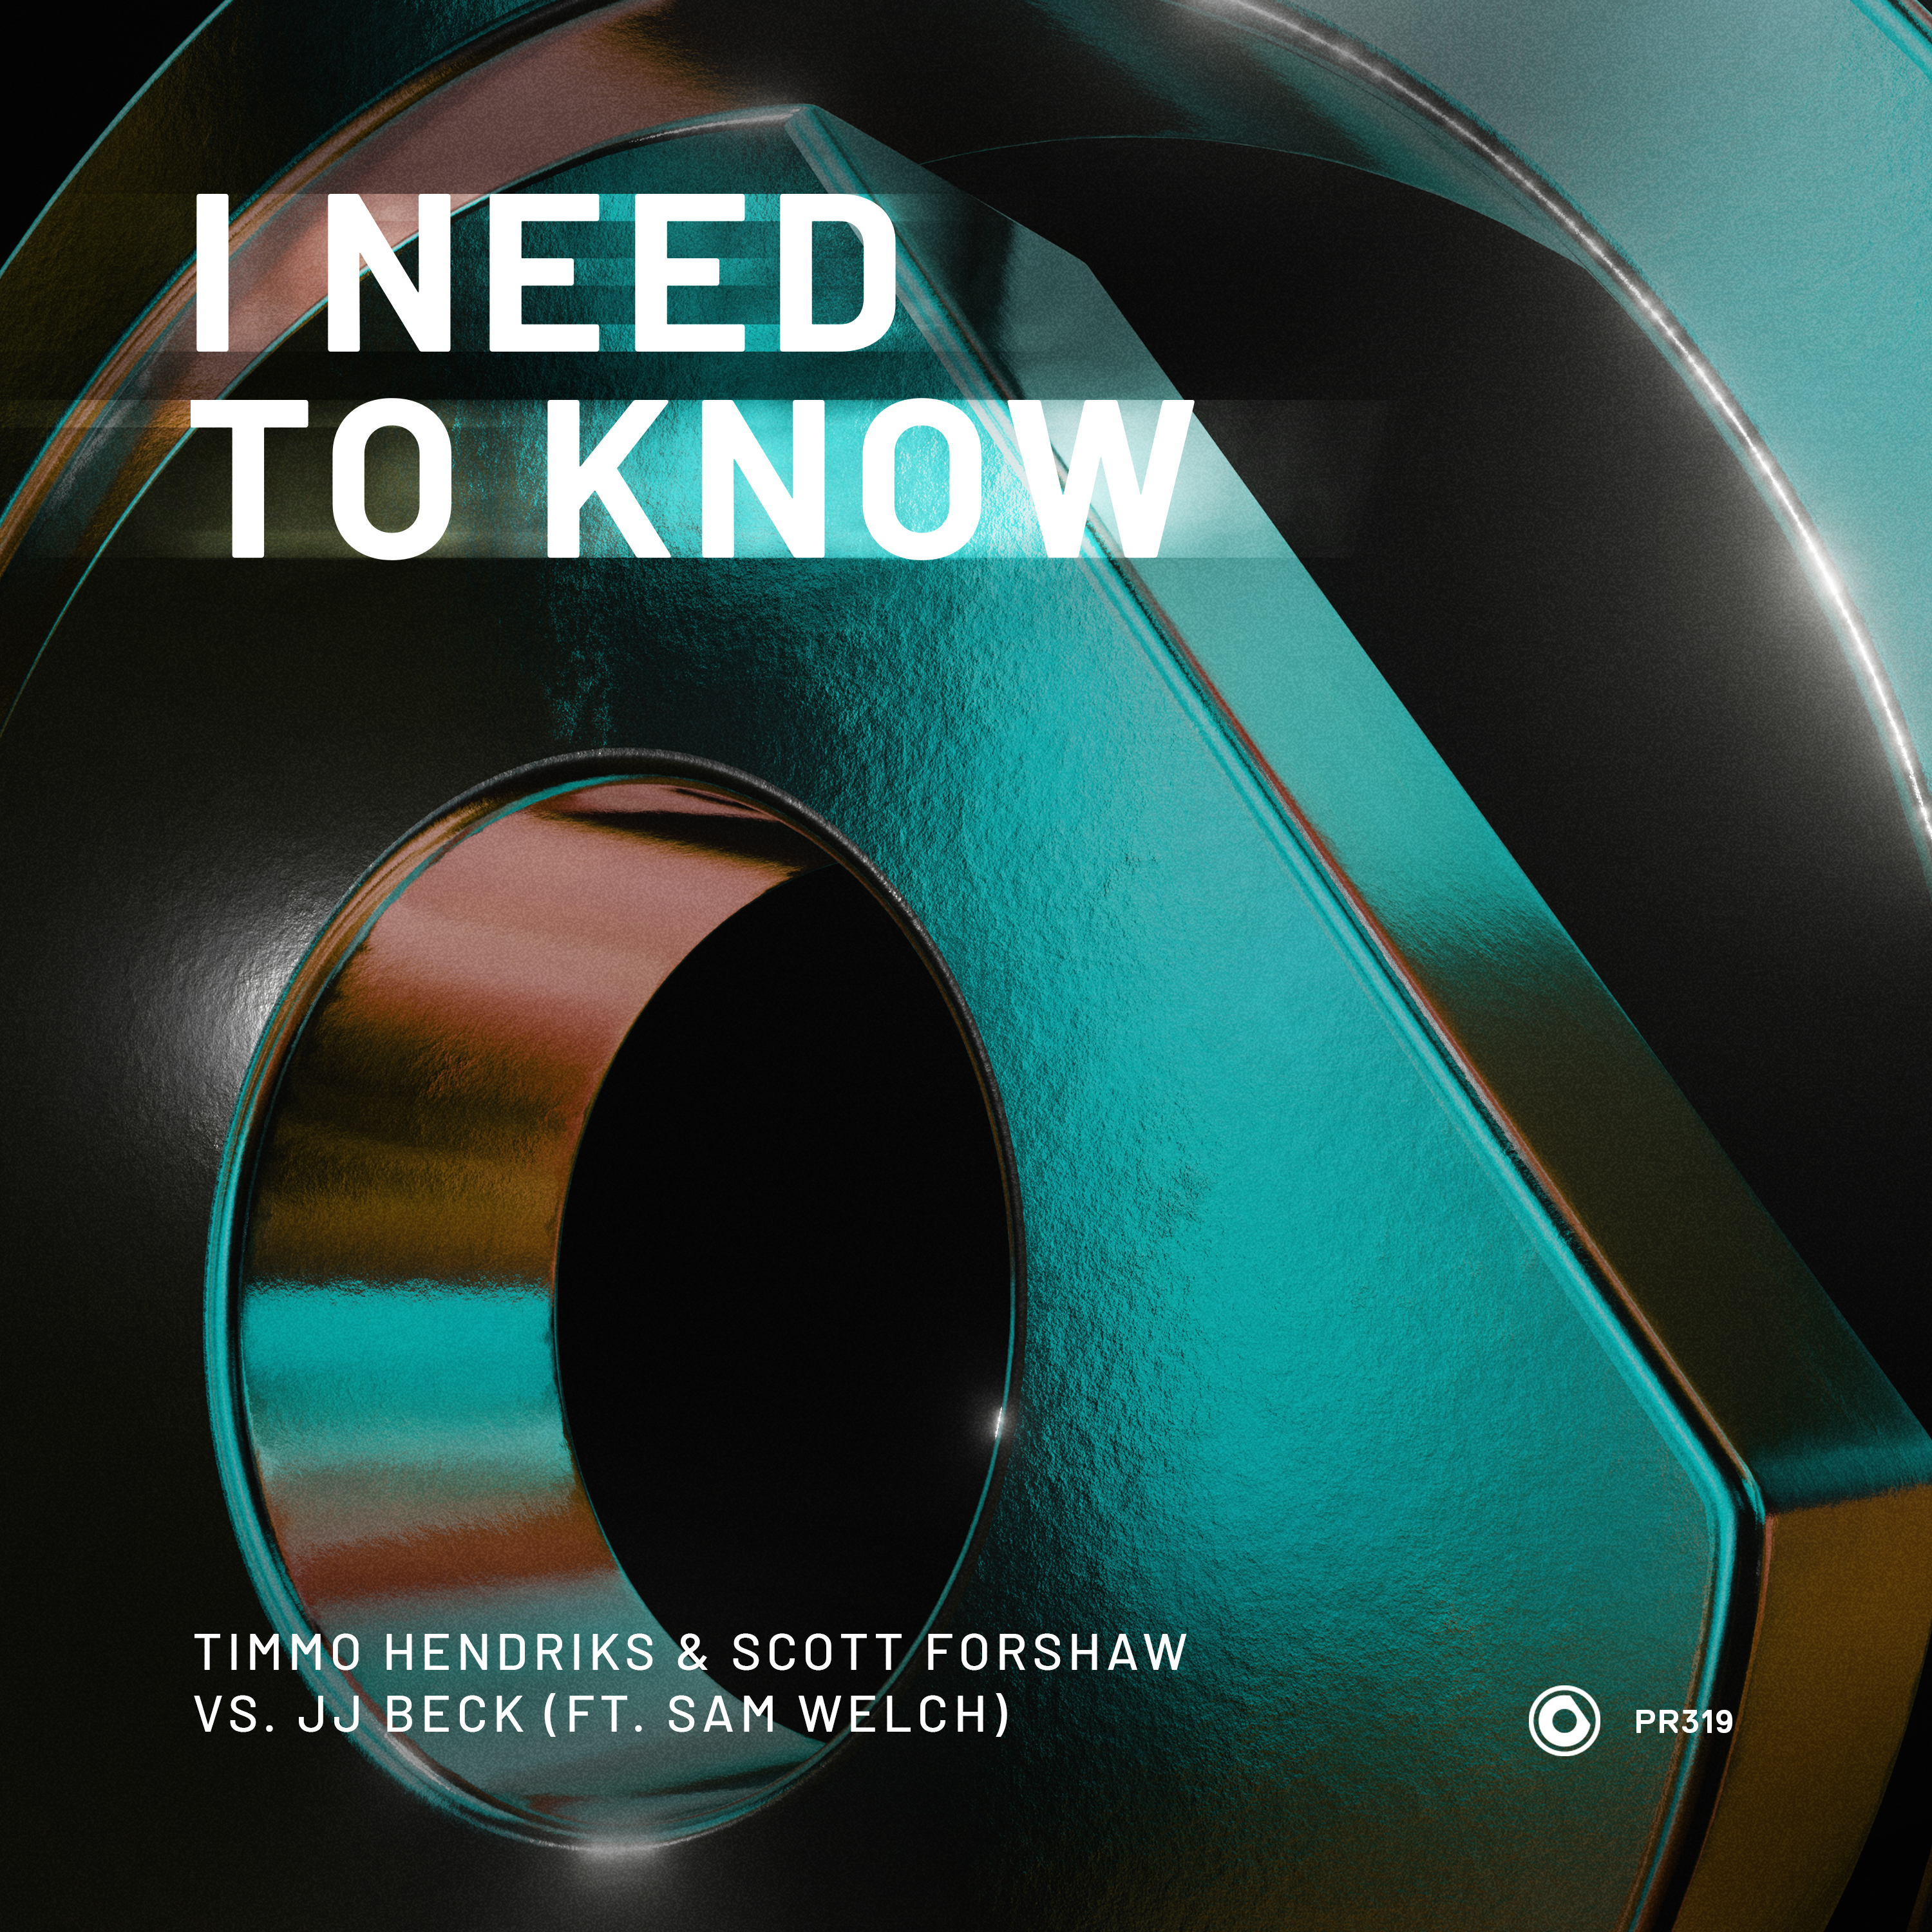  TIMMO HENDRIKS, SCOTT FORSHAW, FORSHAW y JJ BECK NUEVO TRACK “I NEED TO KNOW”